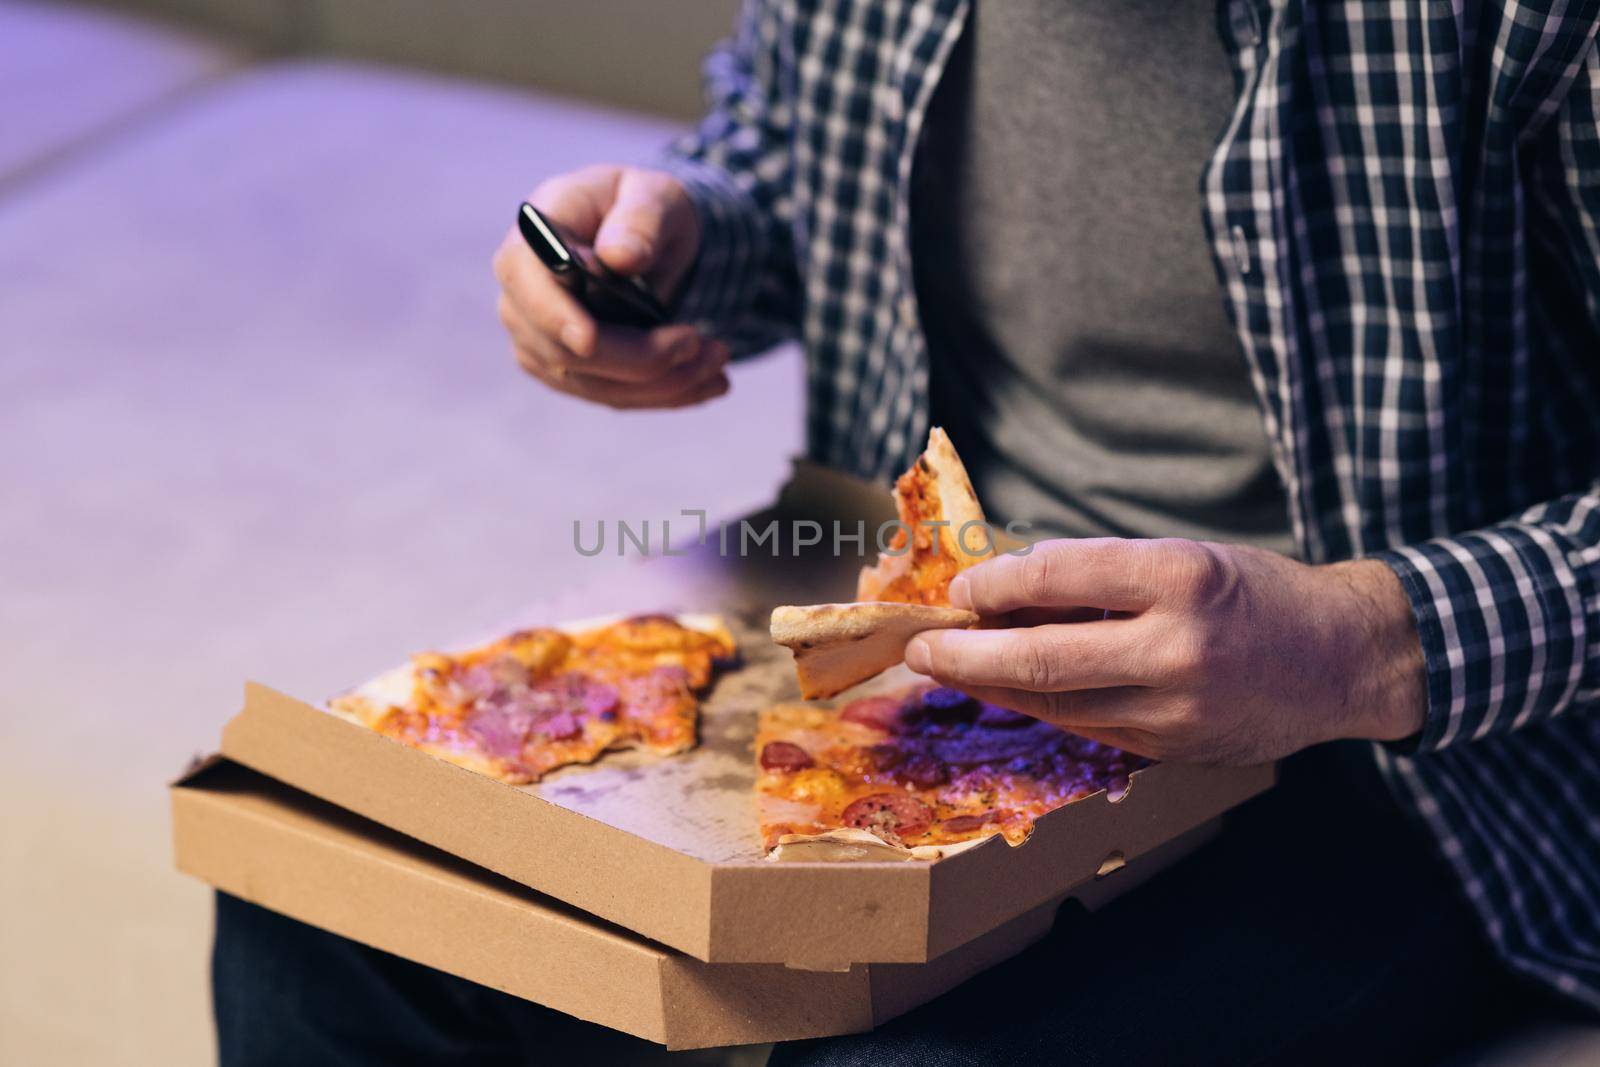 Unrecognizable hand opening carton box with delicious hot pizza. Hot tasty italian pizza from open box, food delivery service at party catering concept. Hand opens a pizza box by uflypro